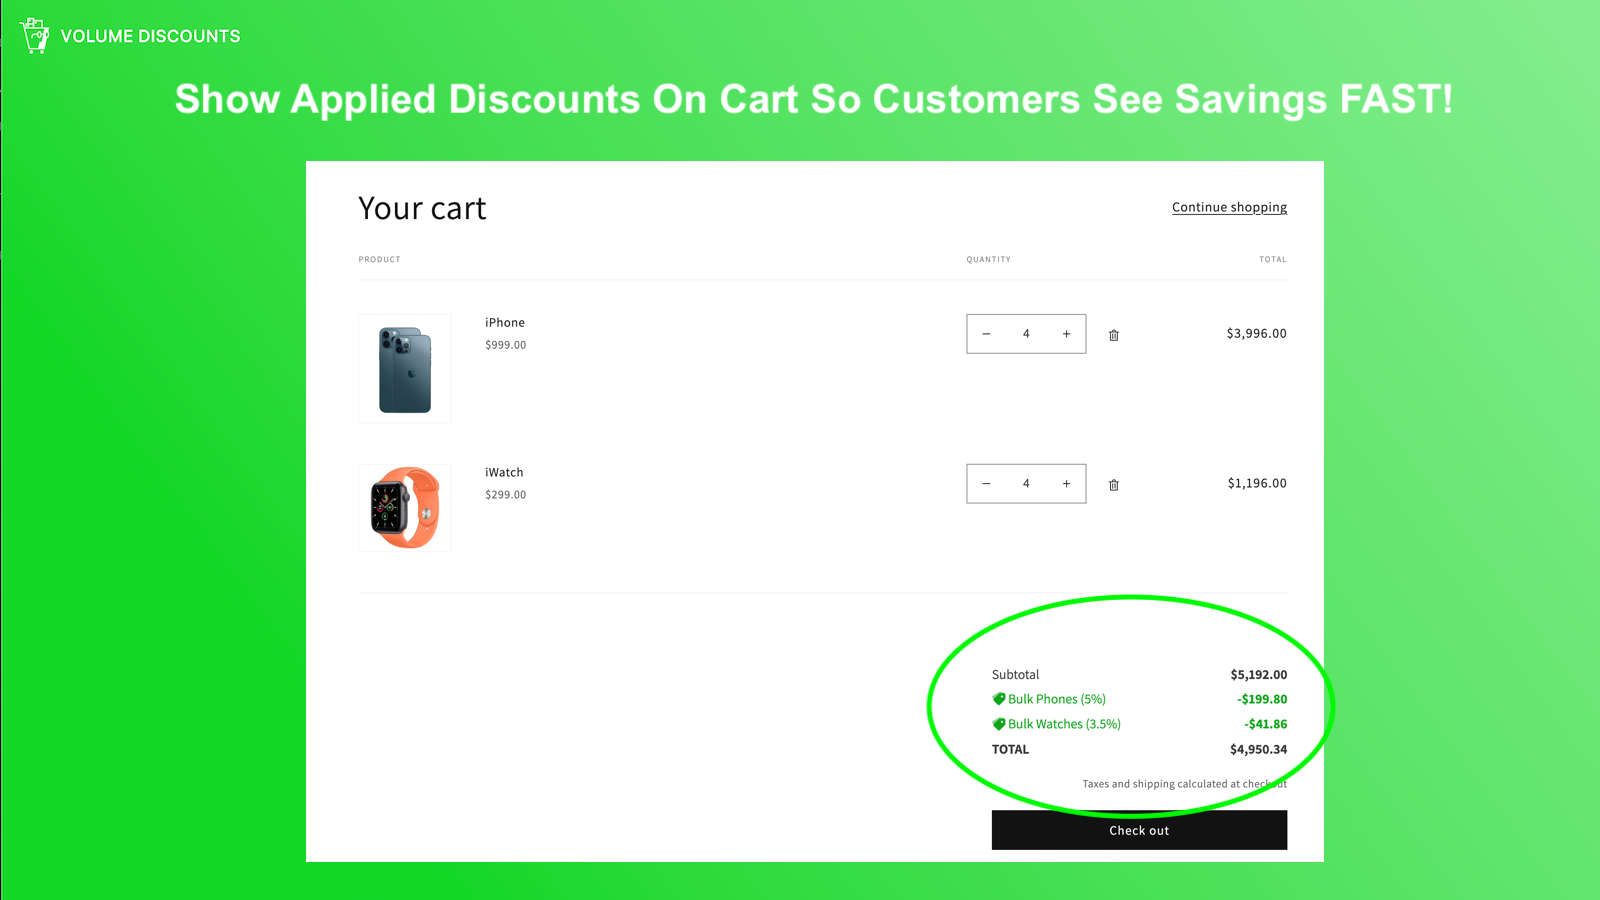 Show Applied Discounts On Cart So Customers See Savings Fast!